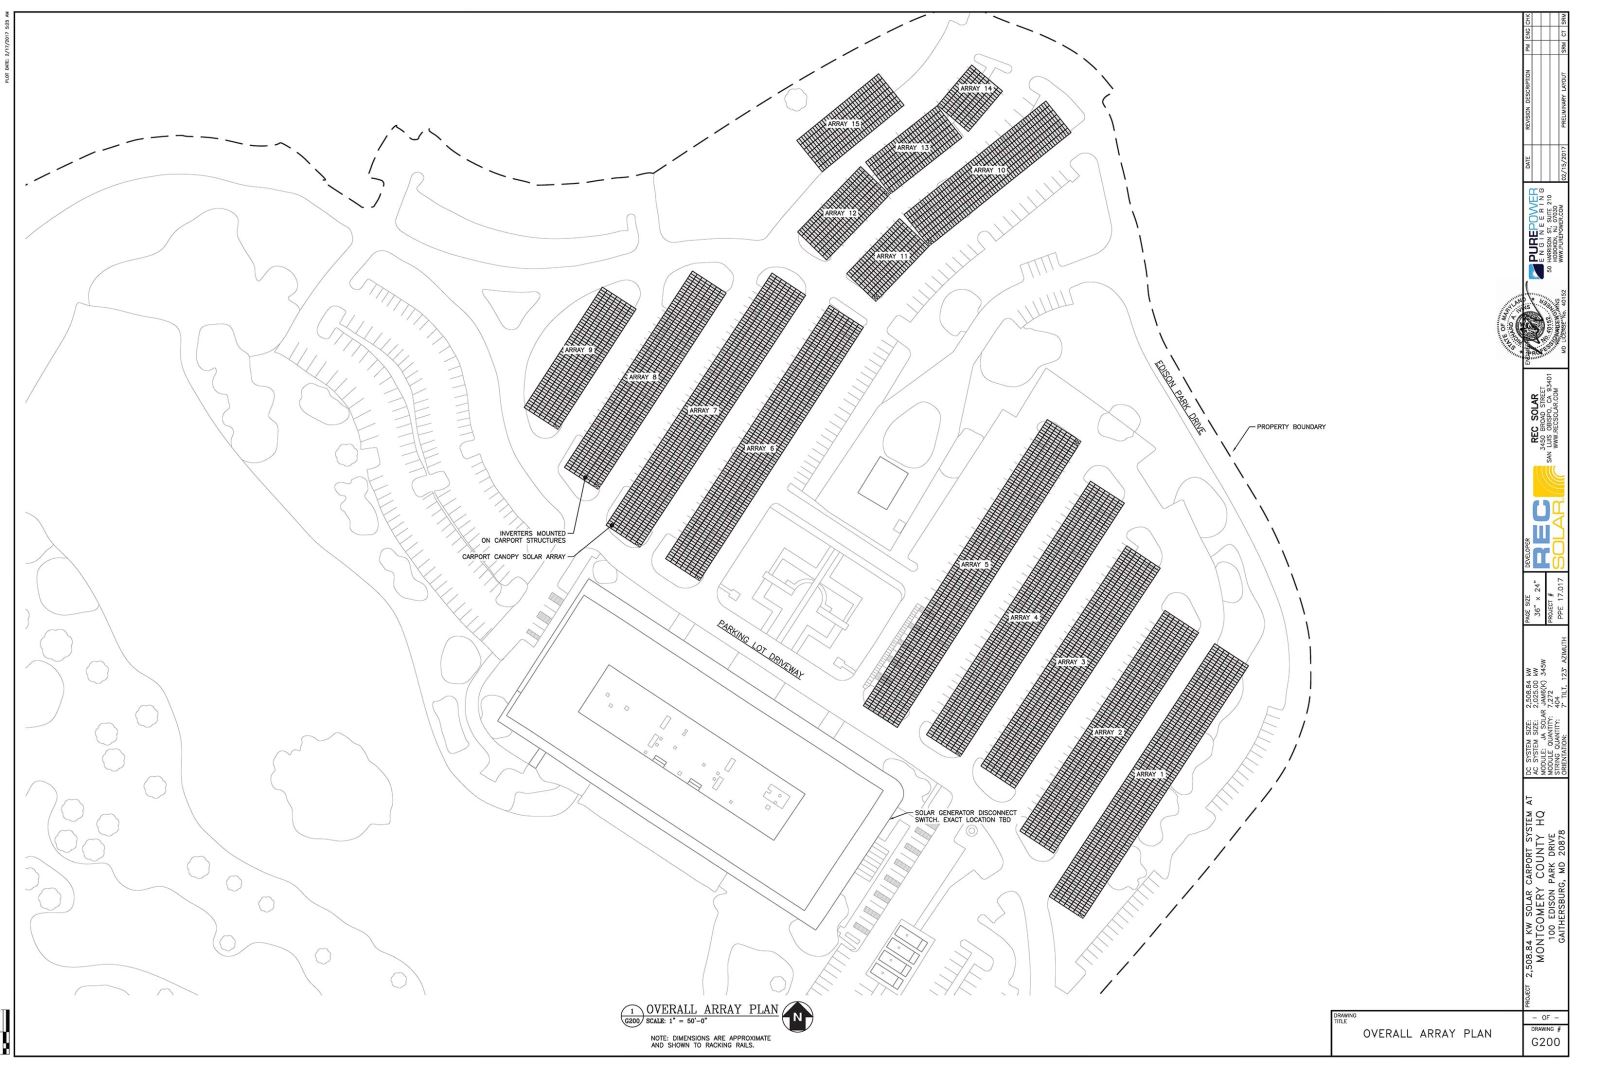 Public Safety Headquarters - Canopy Array Layout